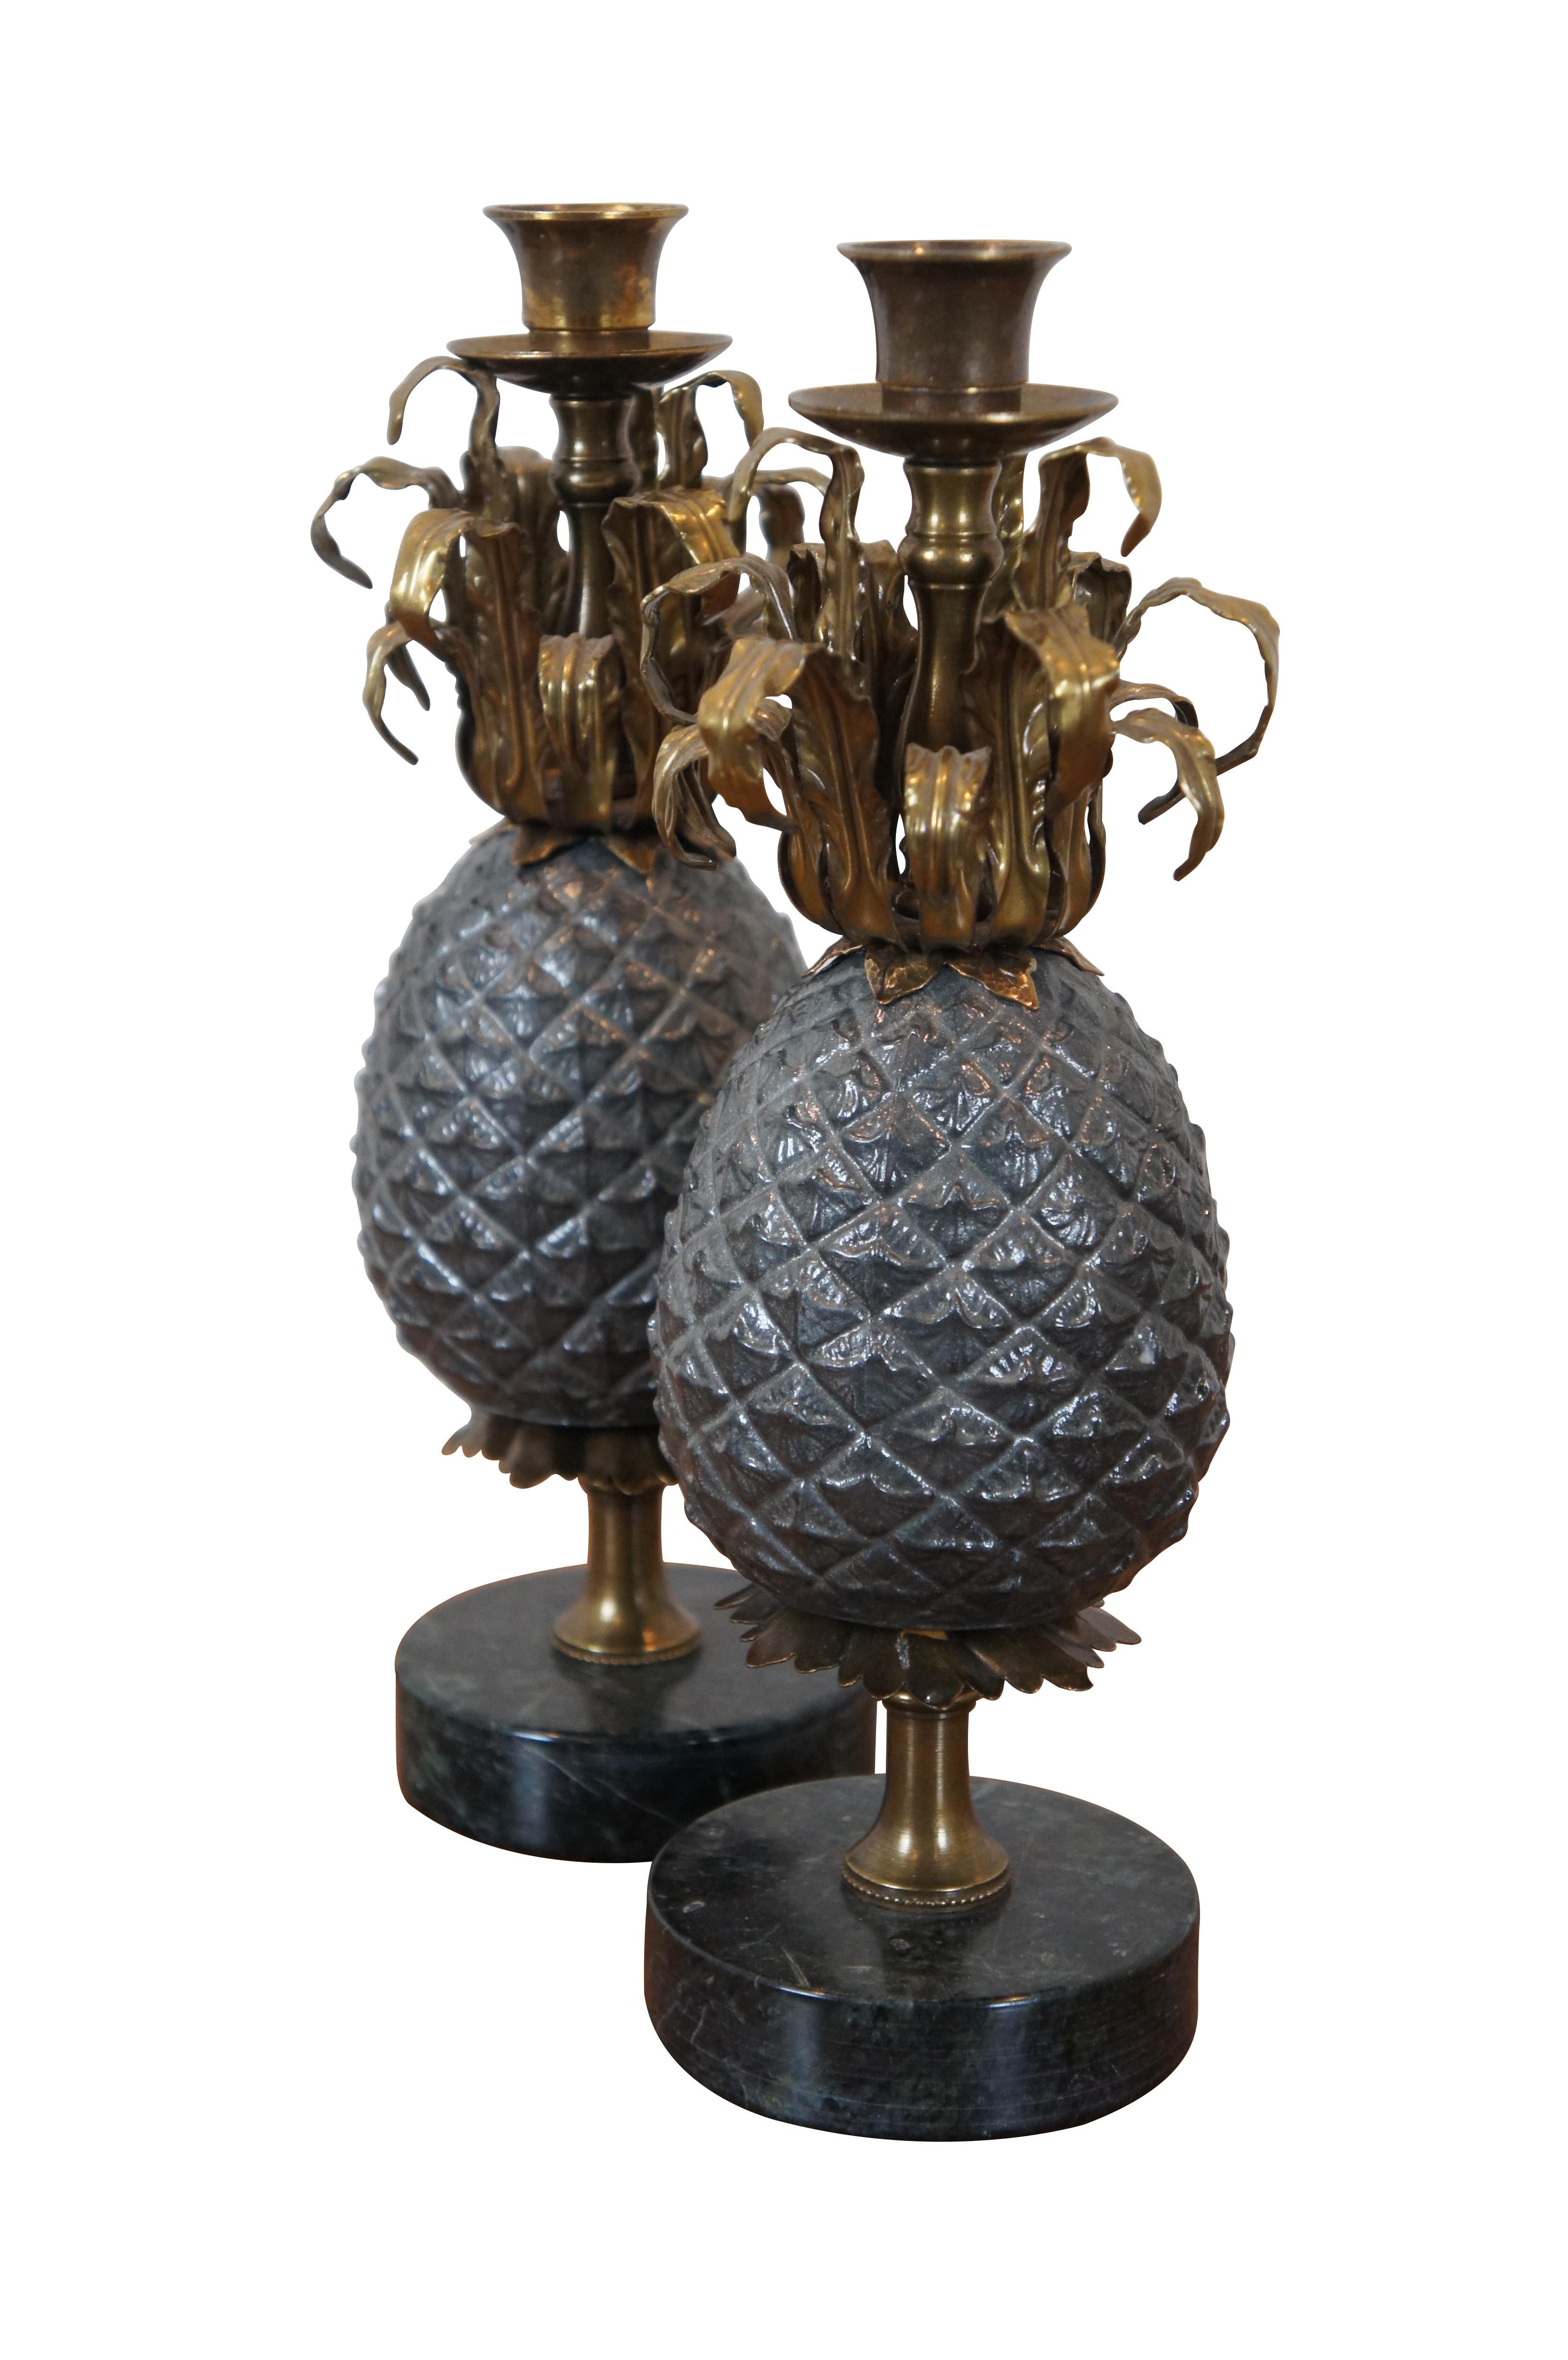 Pair of vintage candlesticks / taper candle holders by Petite Choses, purchased at Wakefield-Scearce Galleries of Shelbyvillle, Kentucky. Round black marble bases supporting pewter and brass pineapples, topped with traditionally styled candle cups.